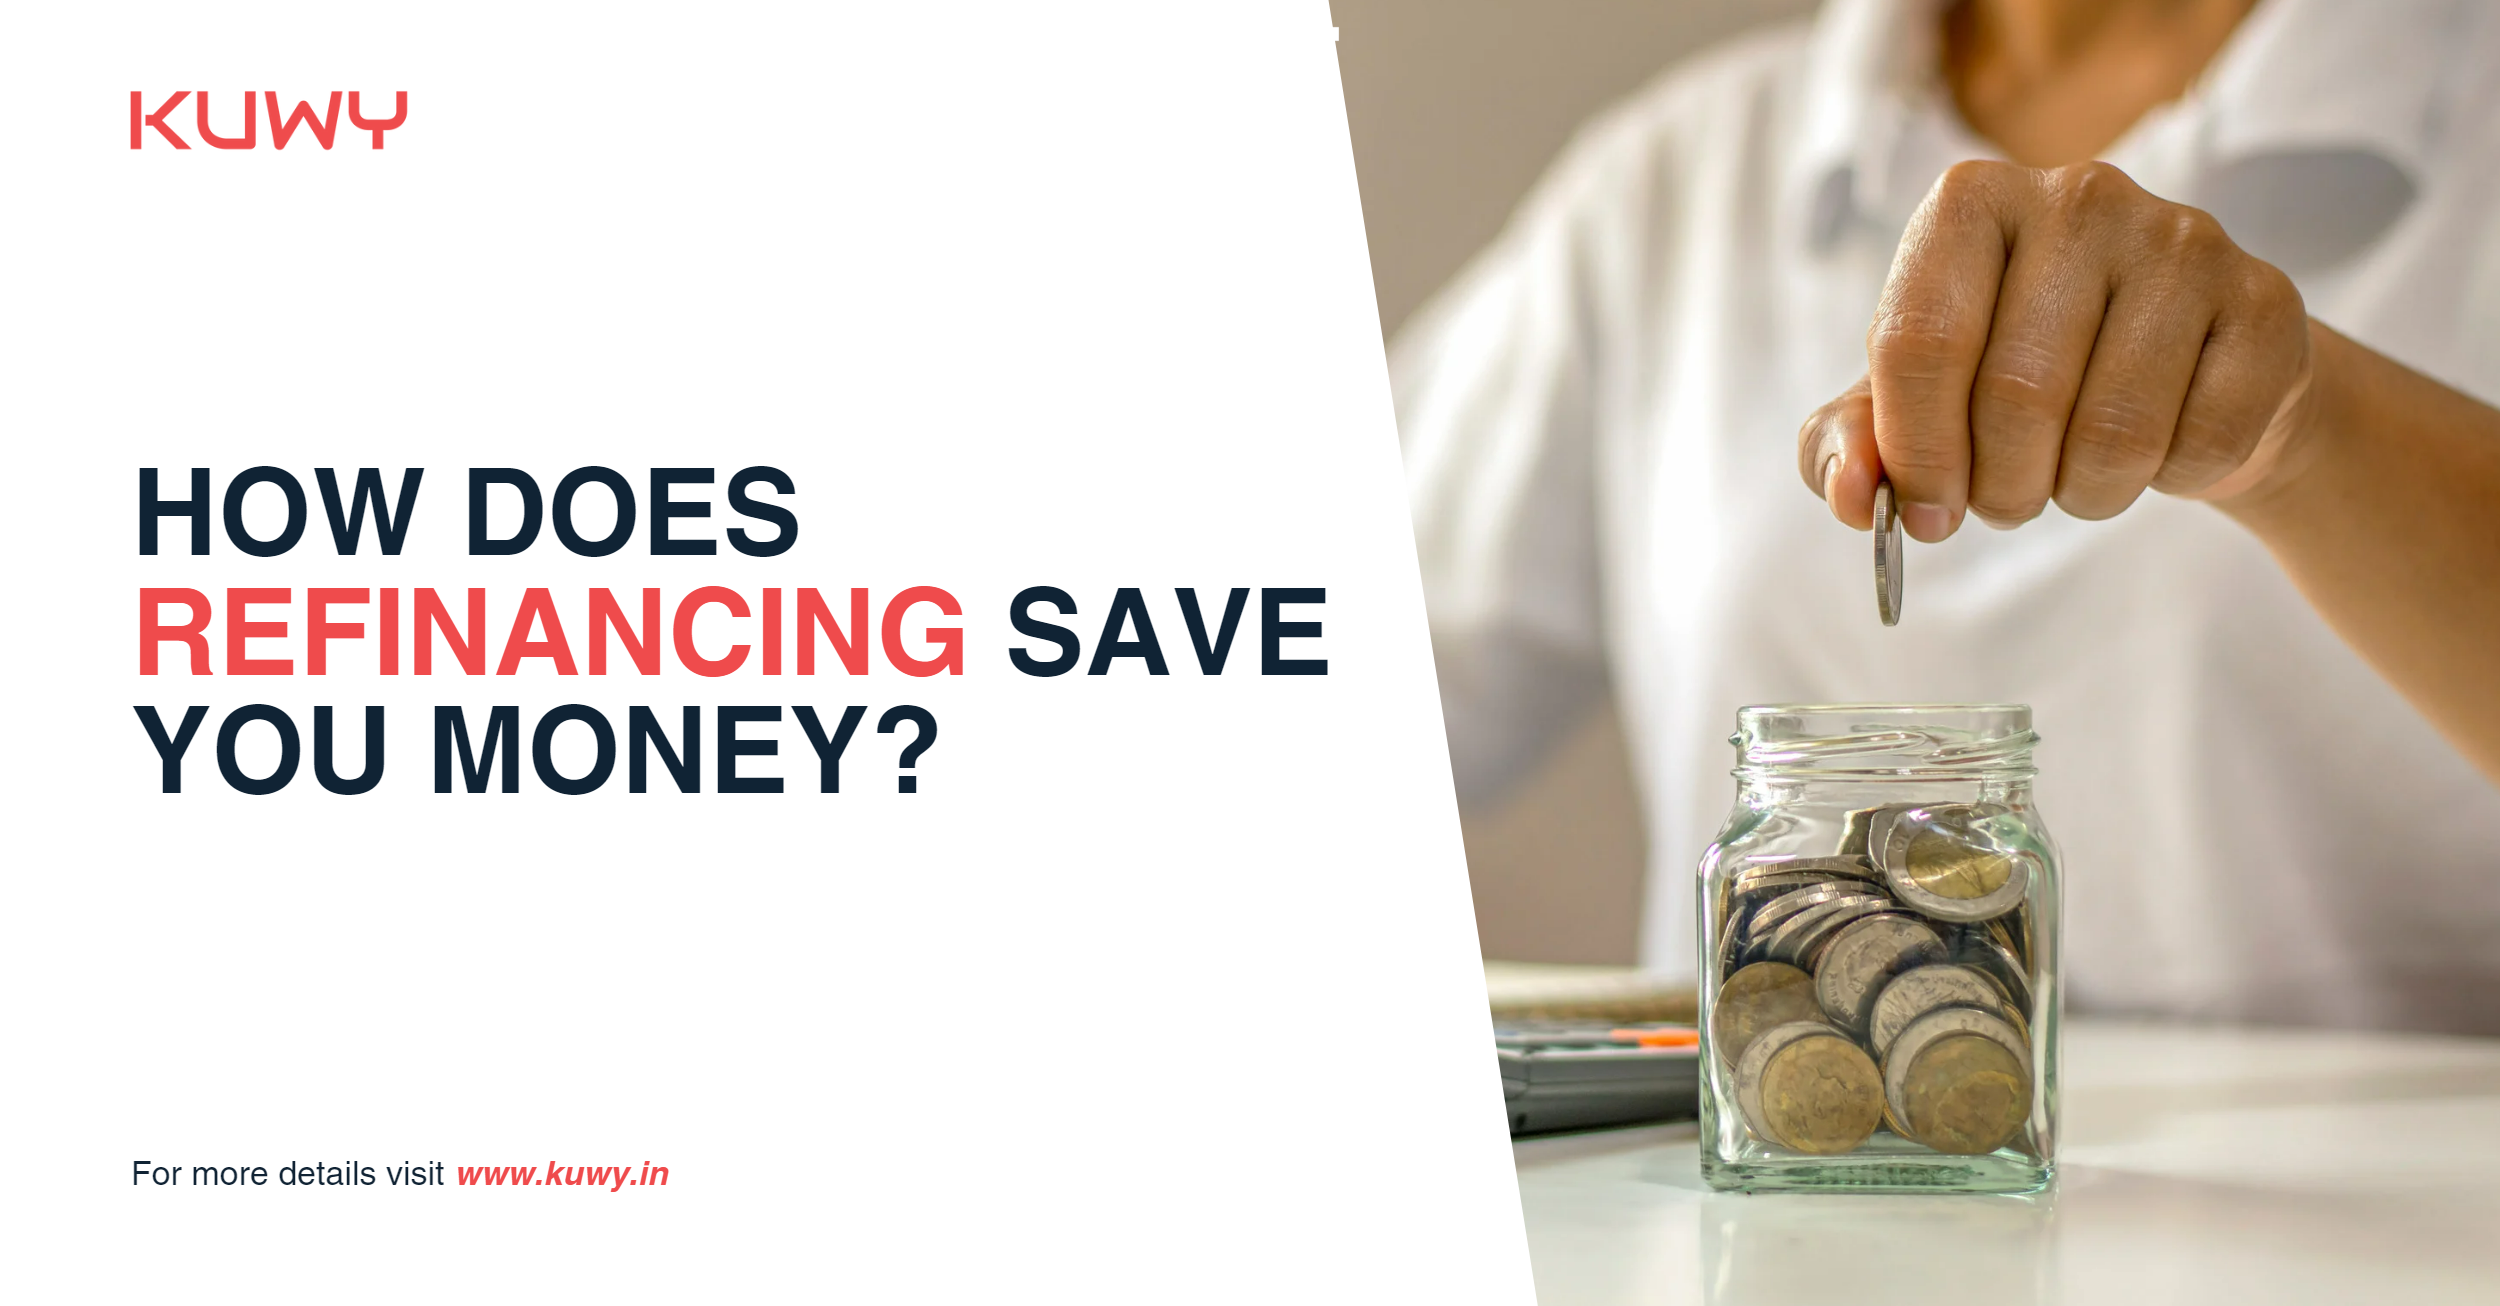 How Does Refinancing Save Your Money?